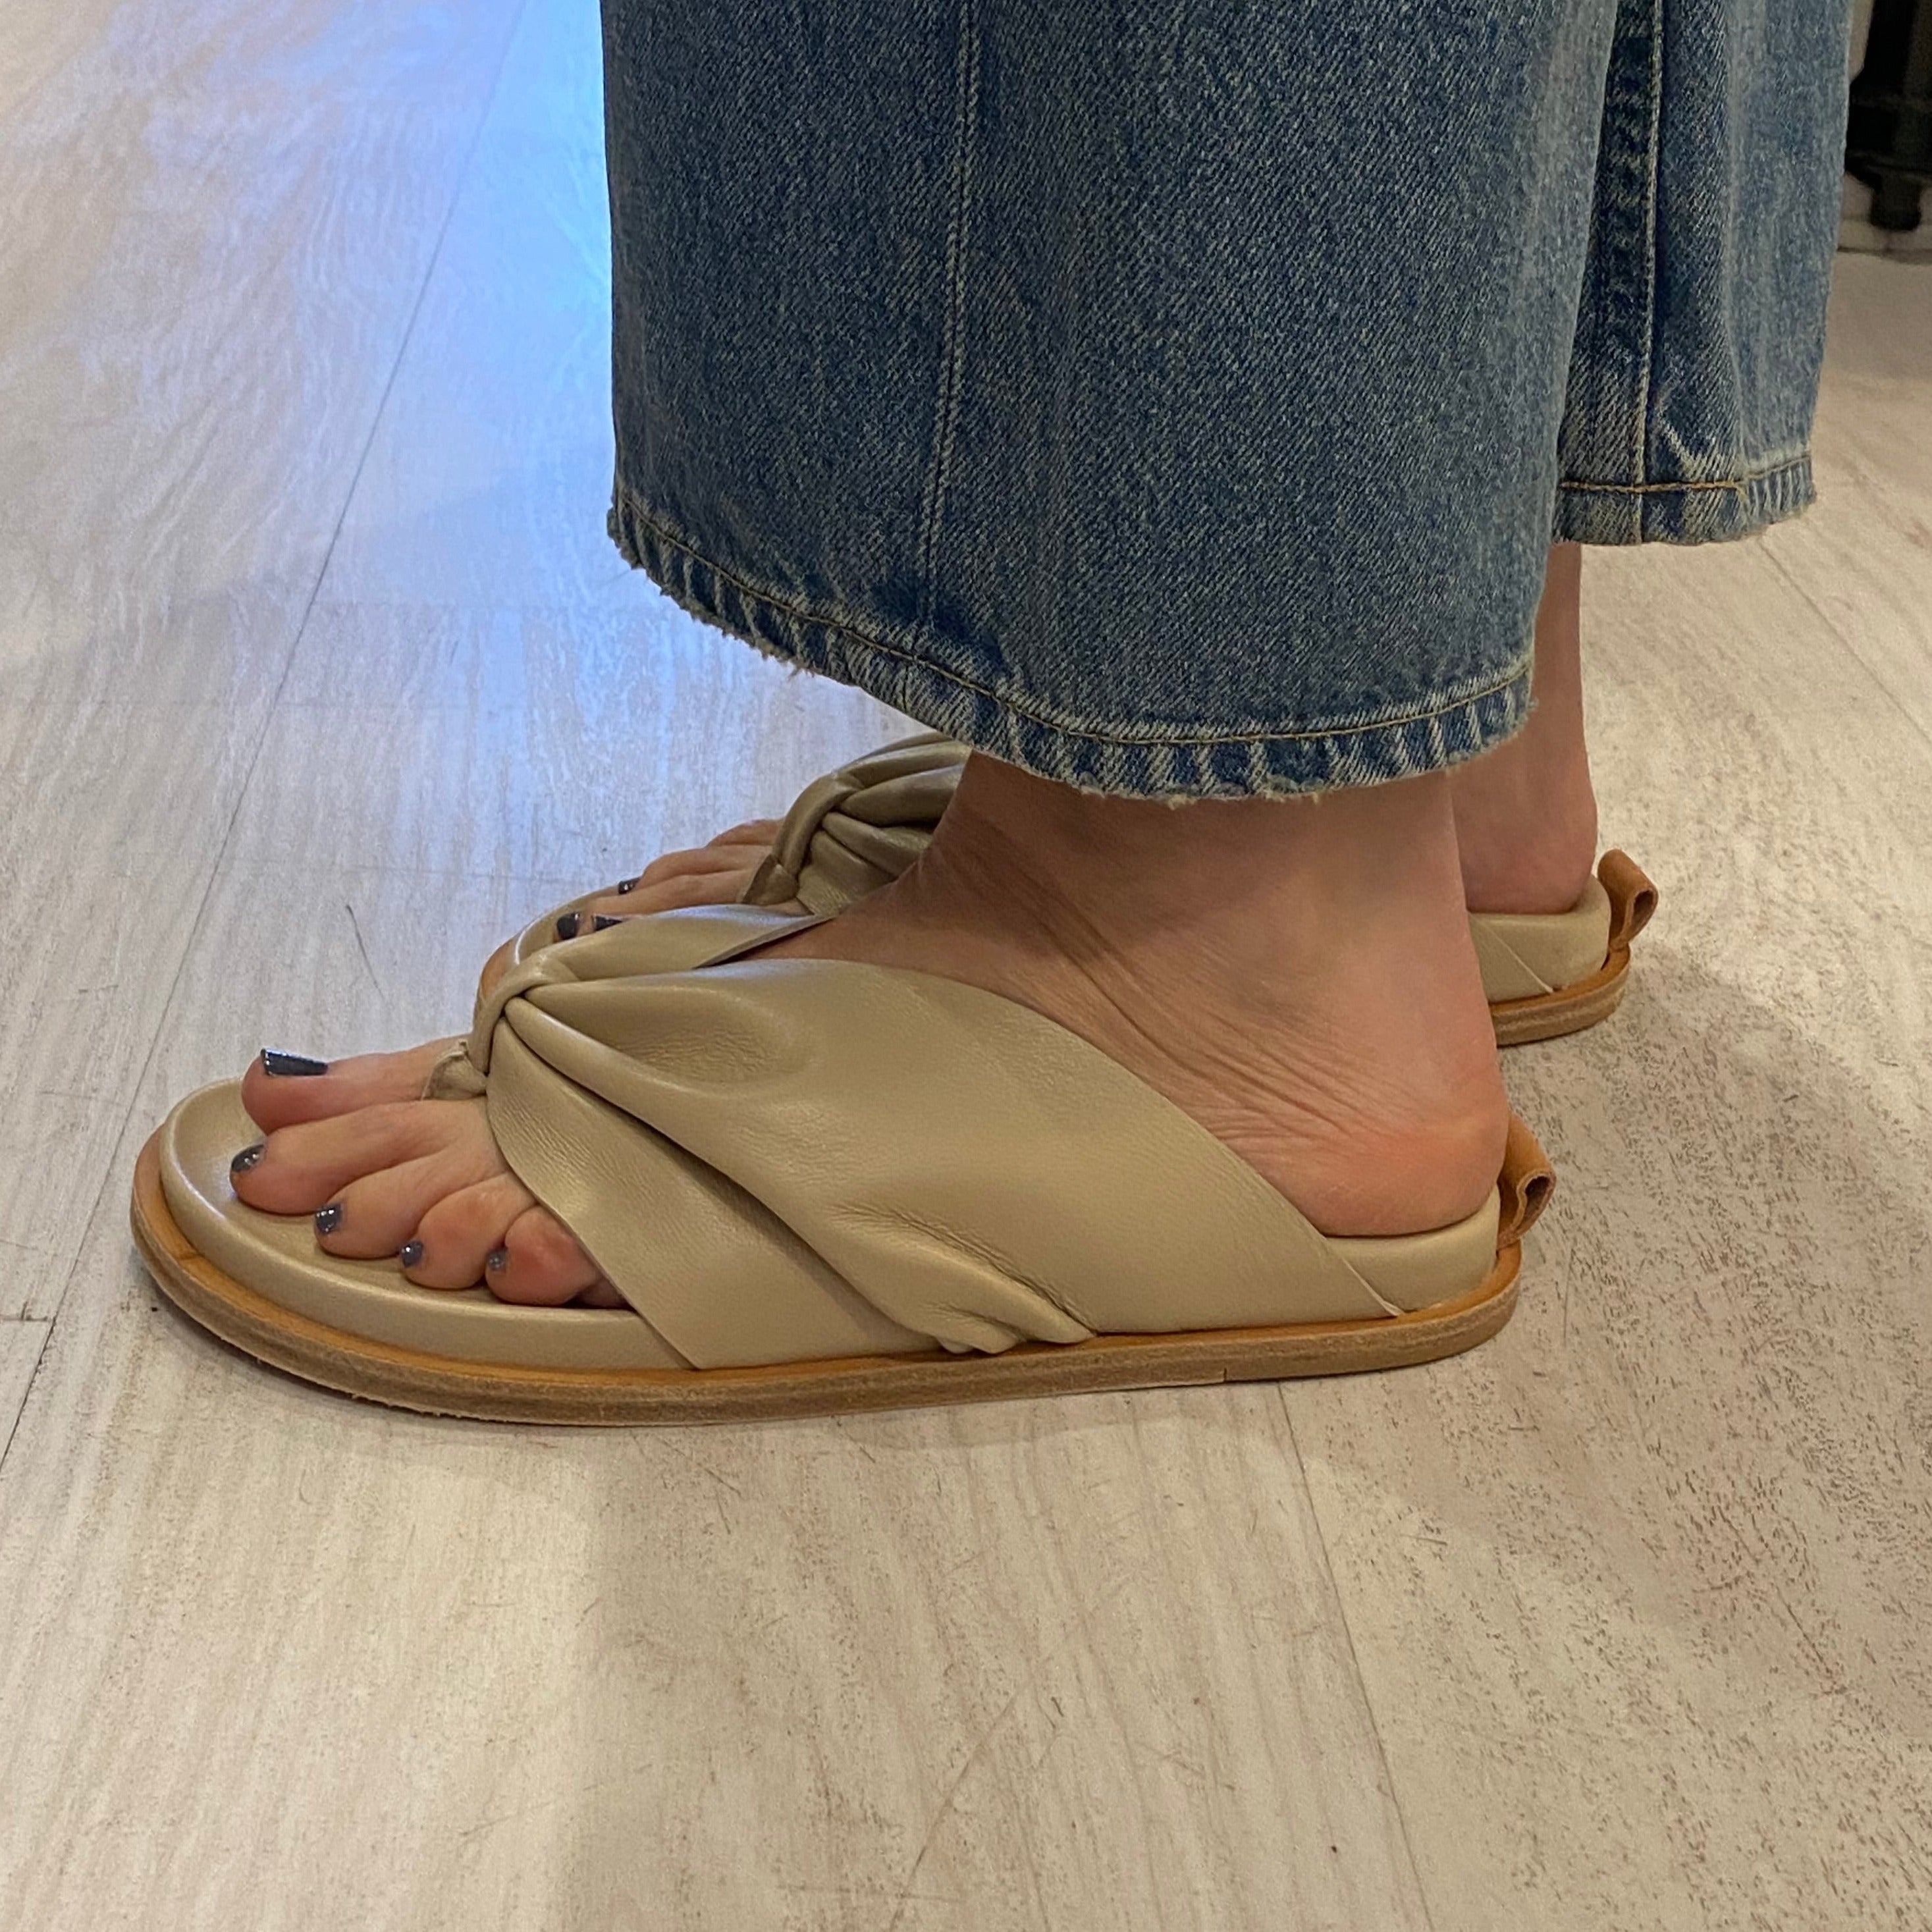 Nappa Leather Thong Sandals Avorio